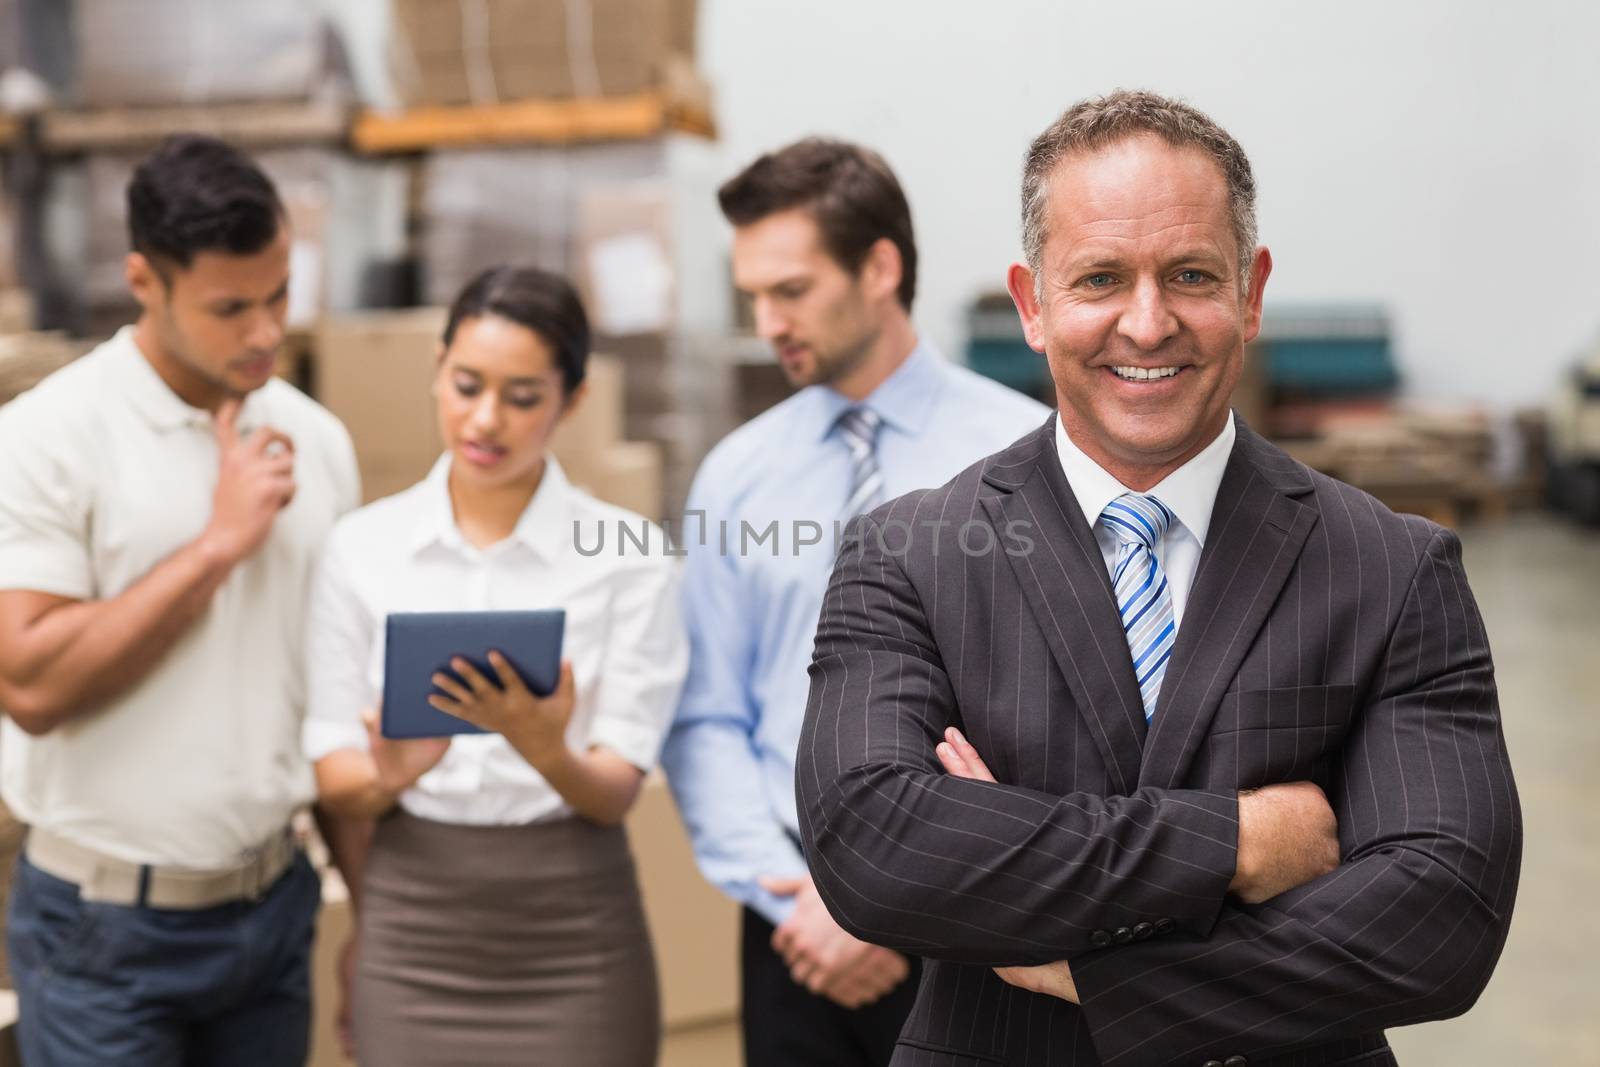 Boss standing with arms crossed in front of his employees in a large warehouse